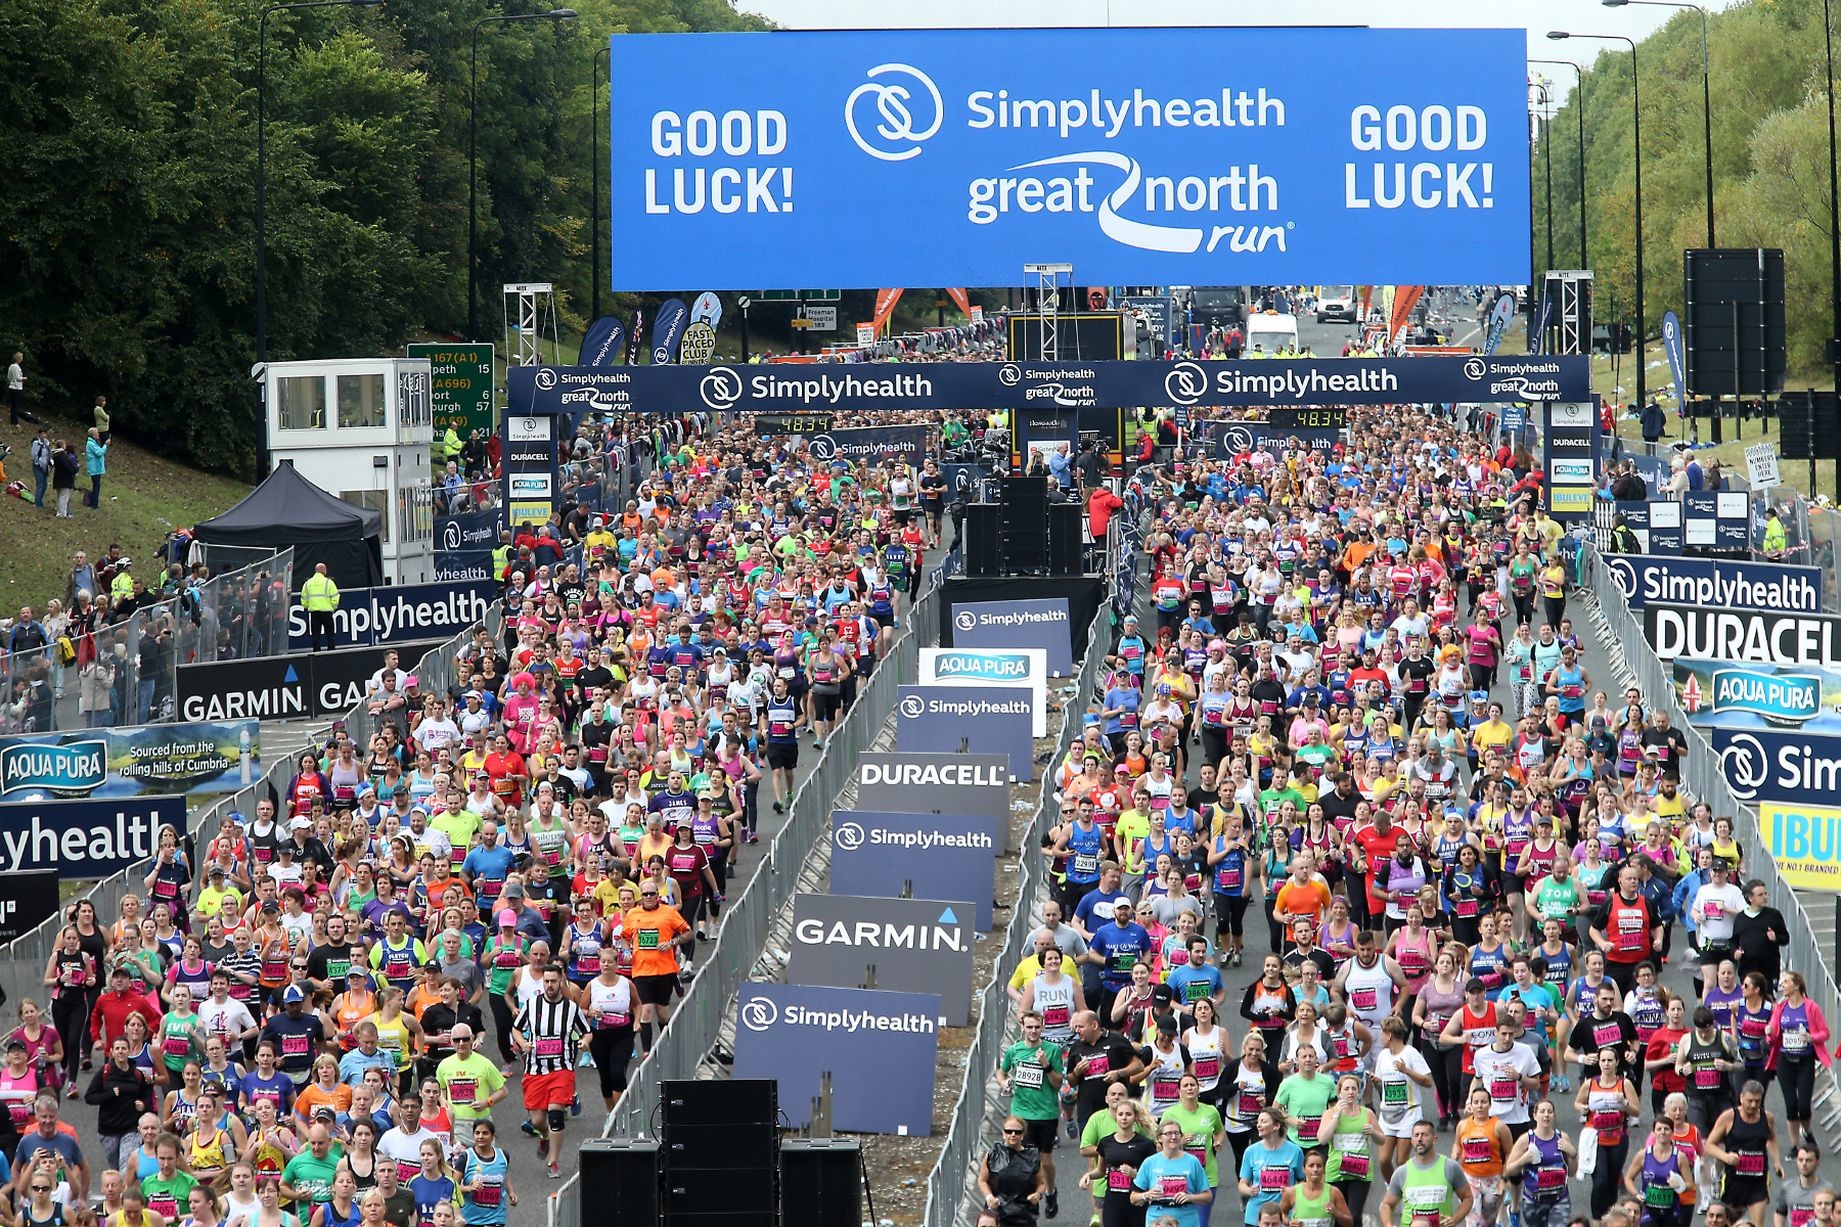 Great North Run Organizers Make Plans for September and searching ways to make the event safe for all who enter
